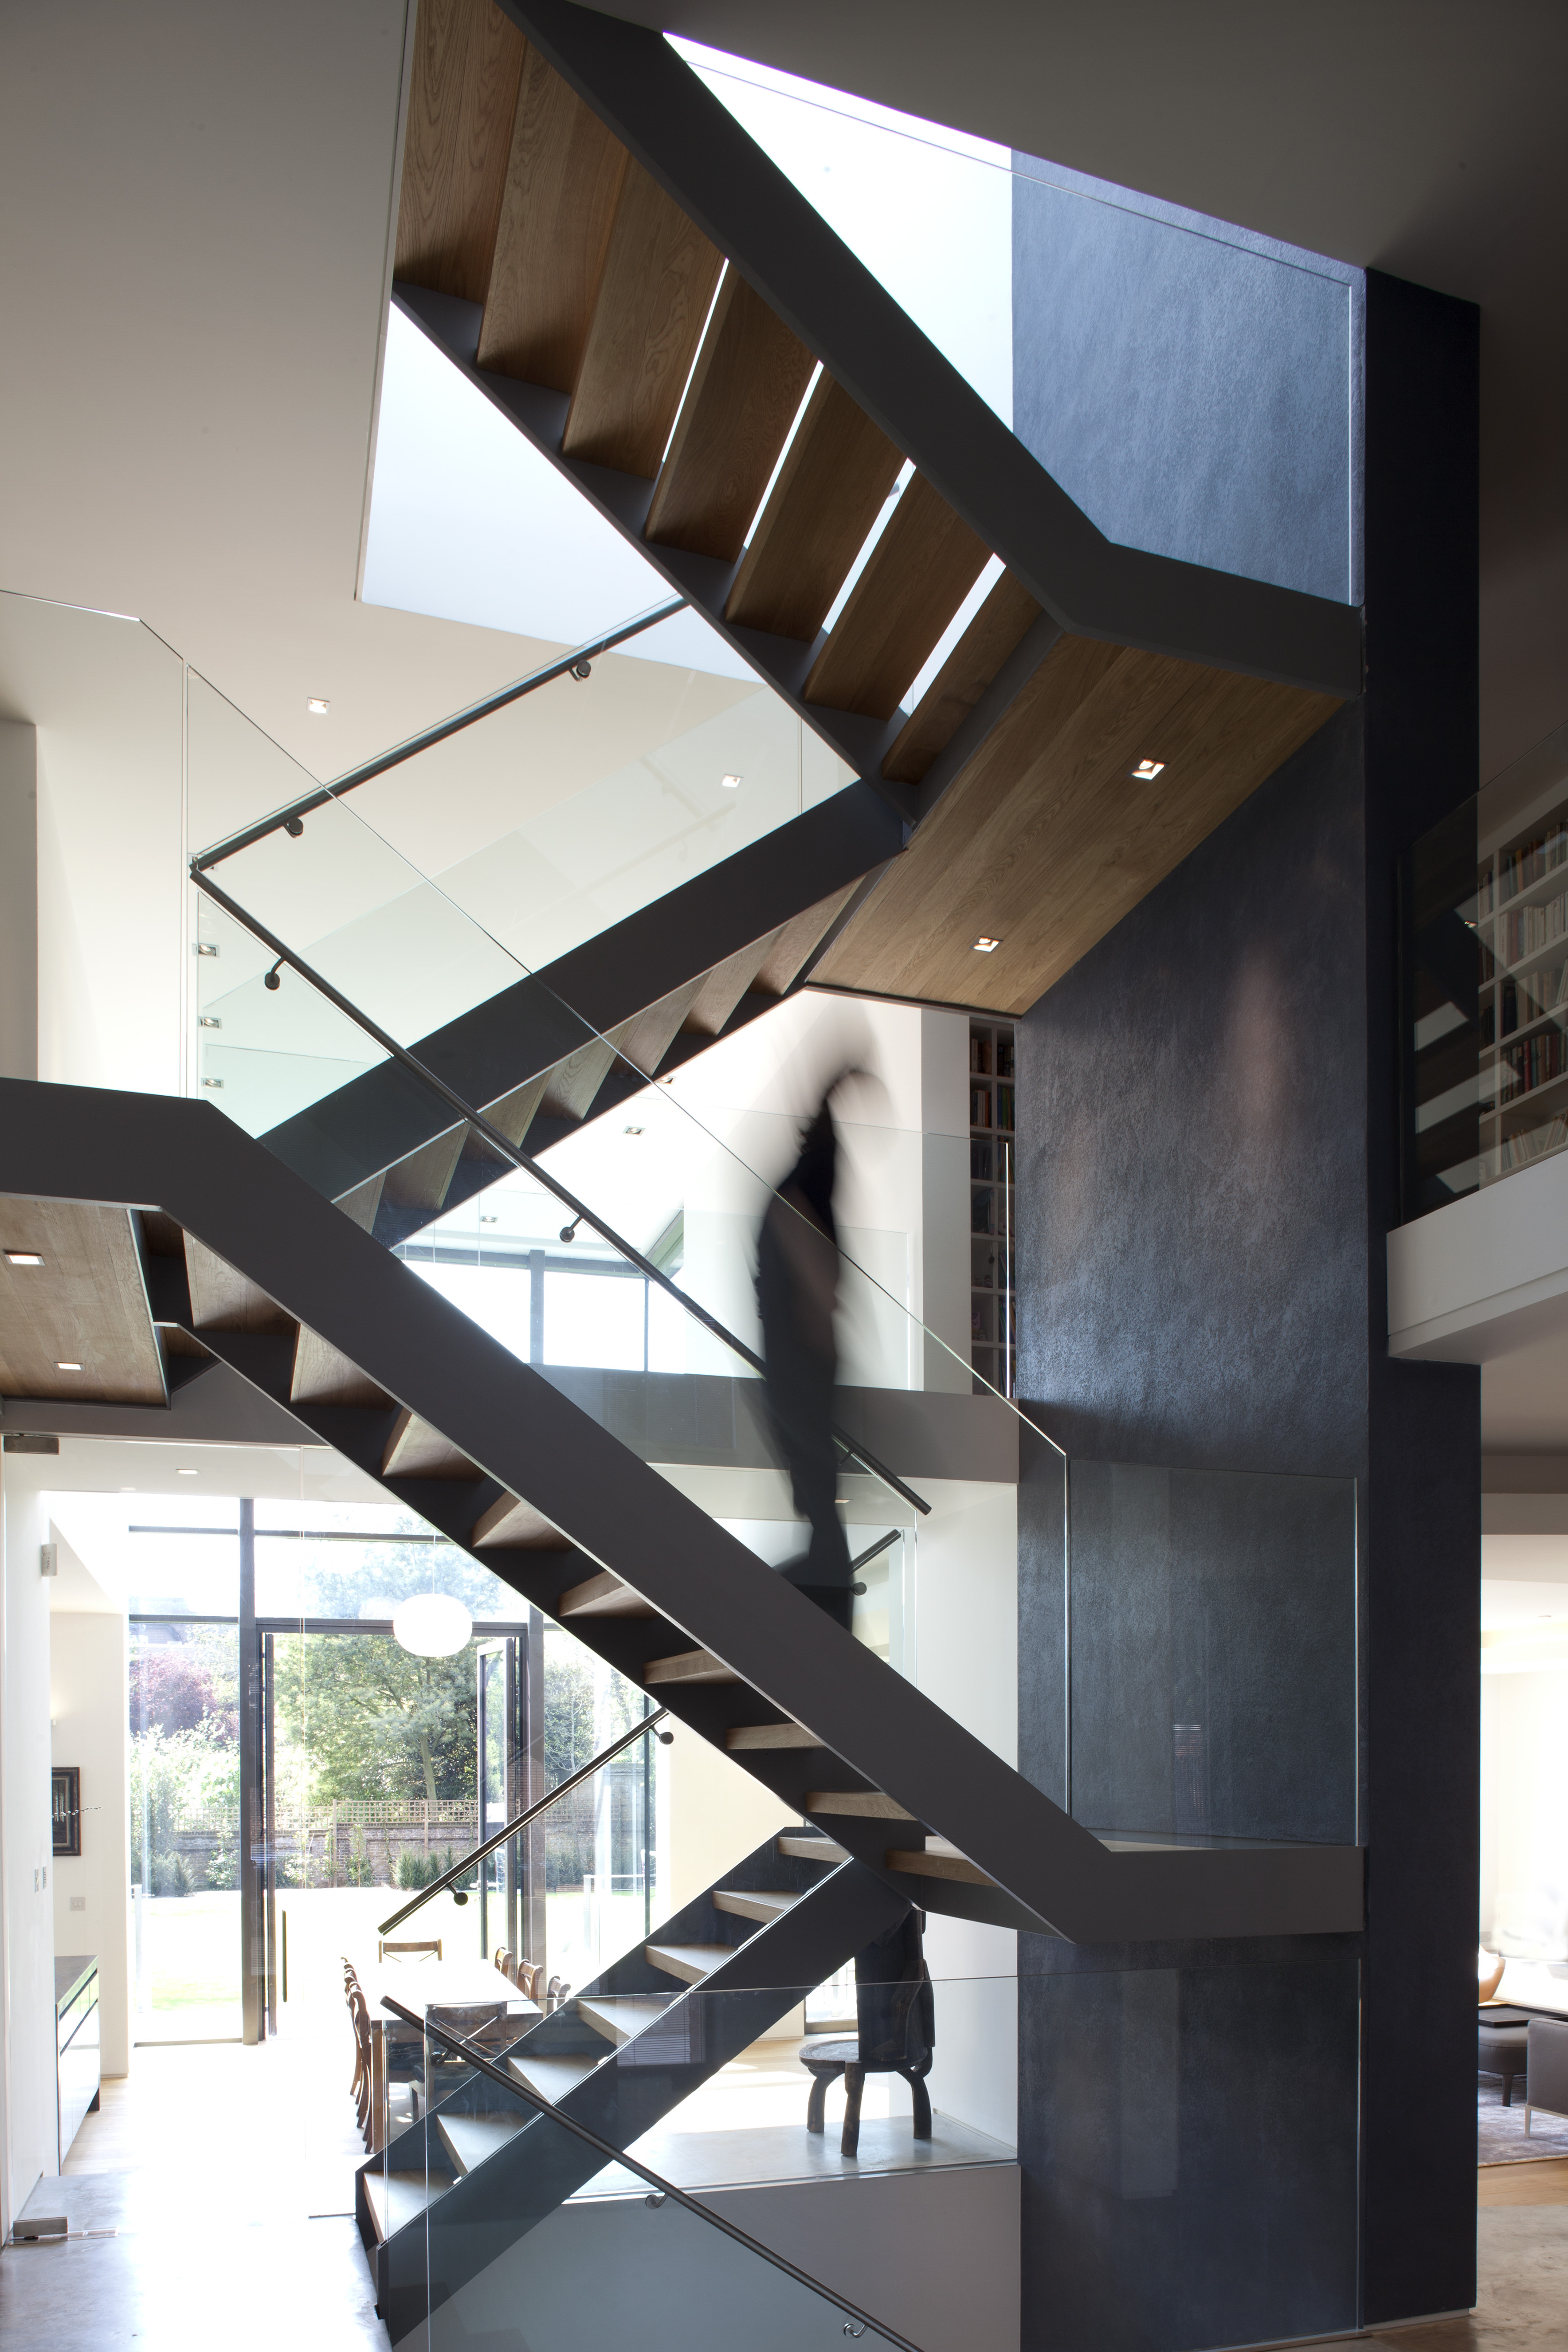 </p> <p>Find your ideal home design pro on designfor-me.com - get matched and see who's interested in your home project. Click image to see more inspiration from our design pros</p> <p>Design by Tom, architect from Battersea</p> <p>#architecture #homedesign #modernhomes #homeinspiration #staircases #staircasedesign #staircaseinspiration #staircaseideas #staircasedesignideas </p> <p>